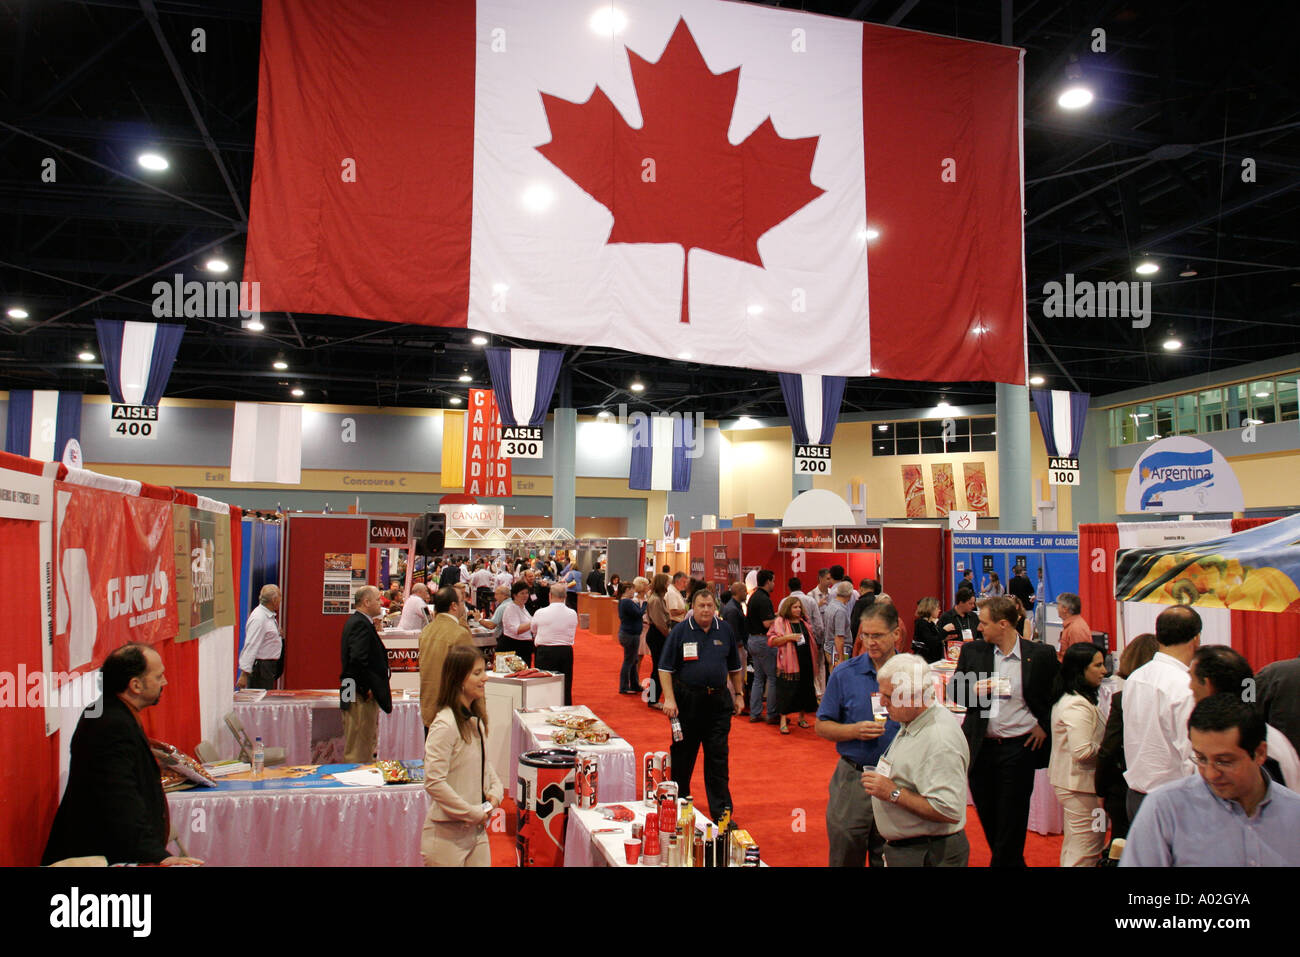 Miami Beach Florida,Convention Center,centre,Americas Food and Beverage Show,trade,product product products display sale,import,export,Canadian Canada Stock Photo